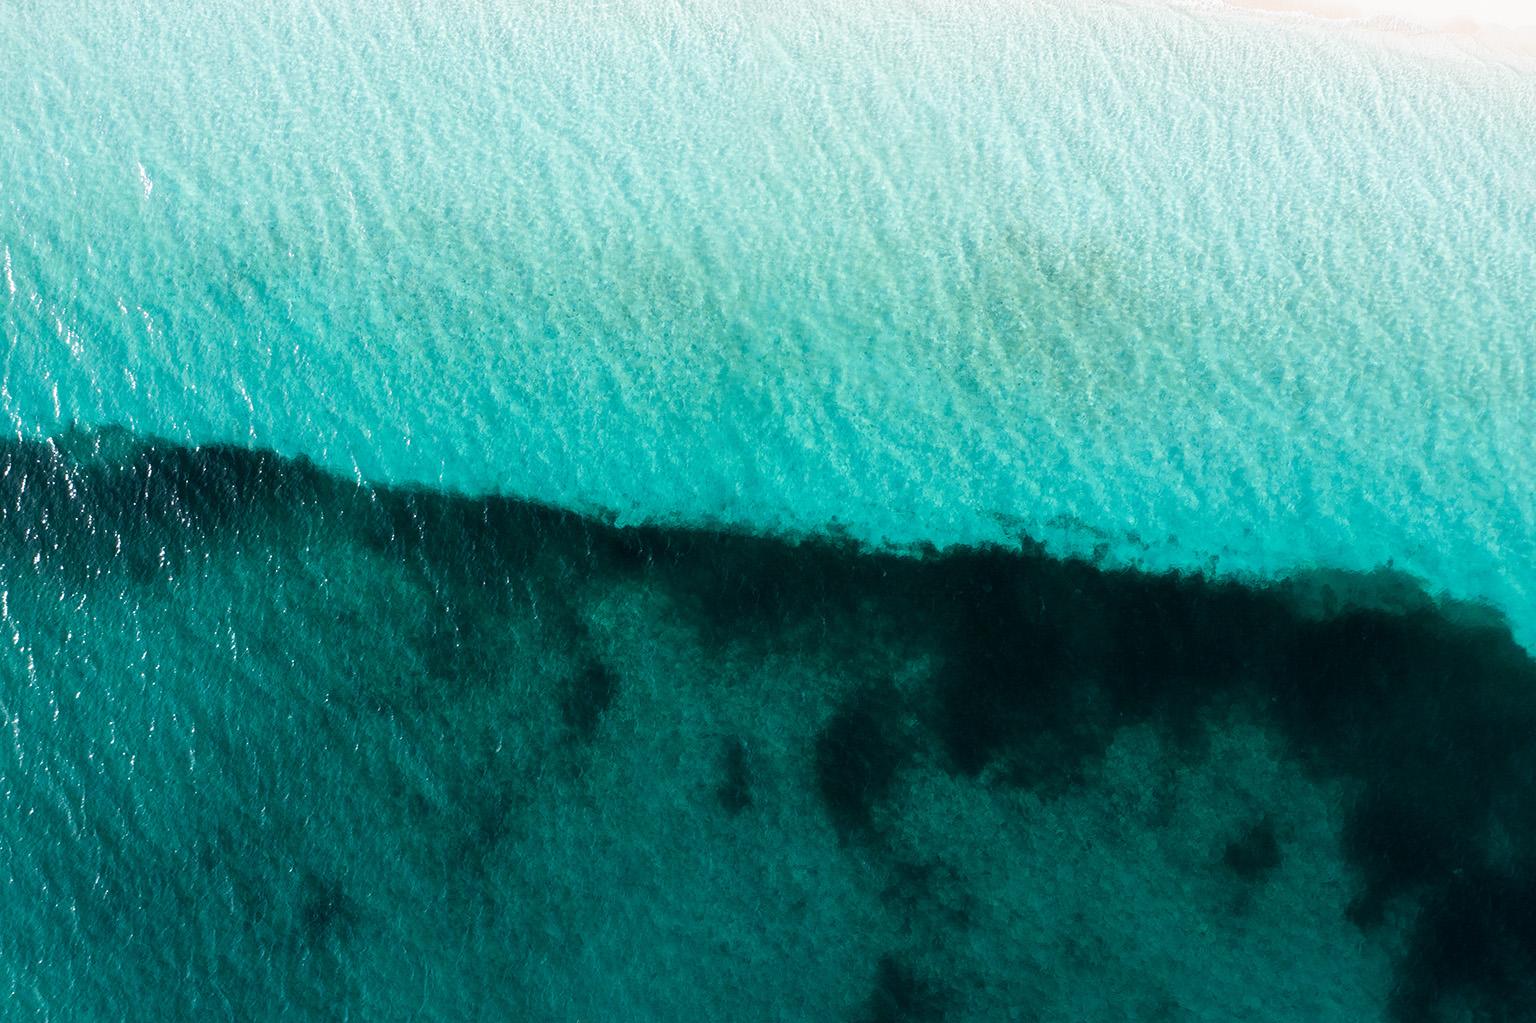 Beach Photography, Ocean Photography, Turks and Caicos-Blue Hues From Above

ABOUT SERIES: 
